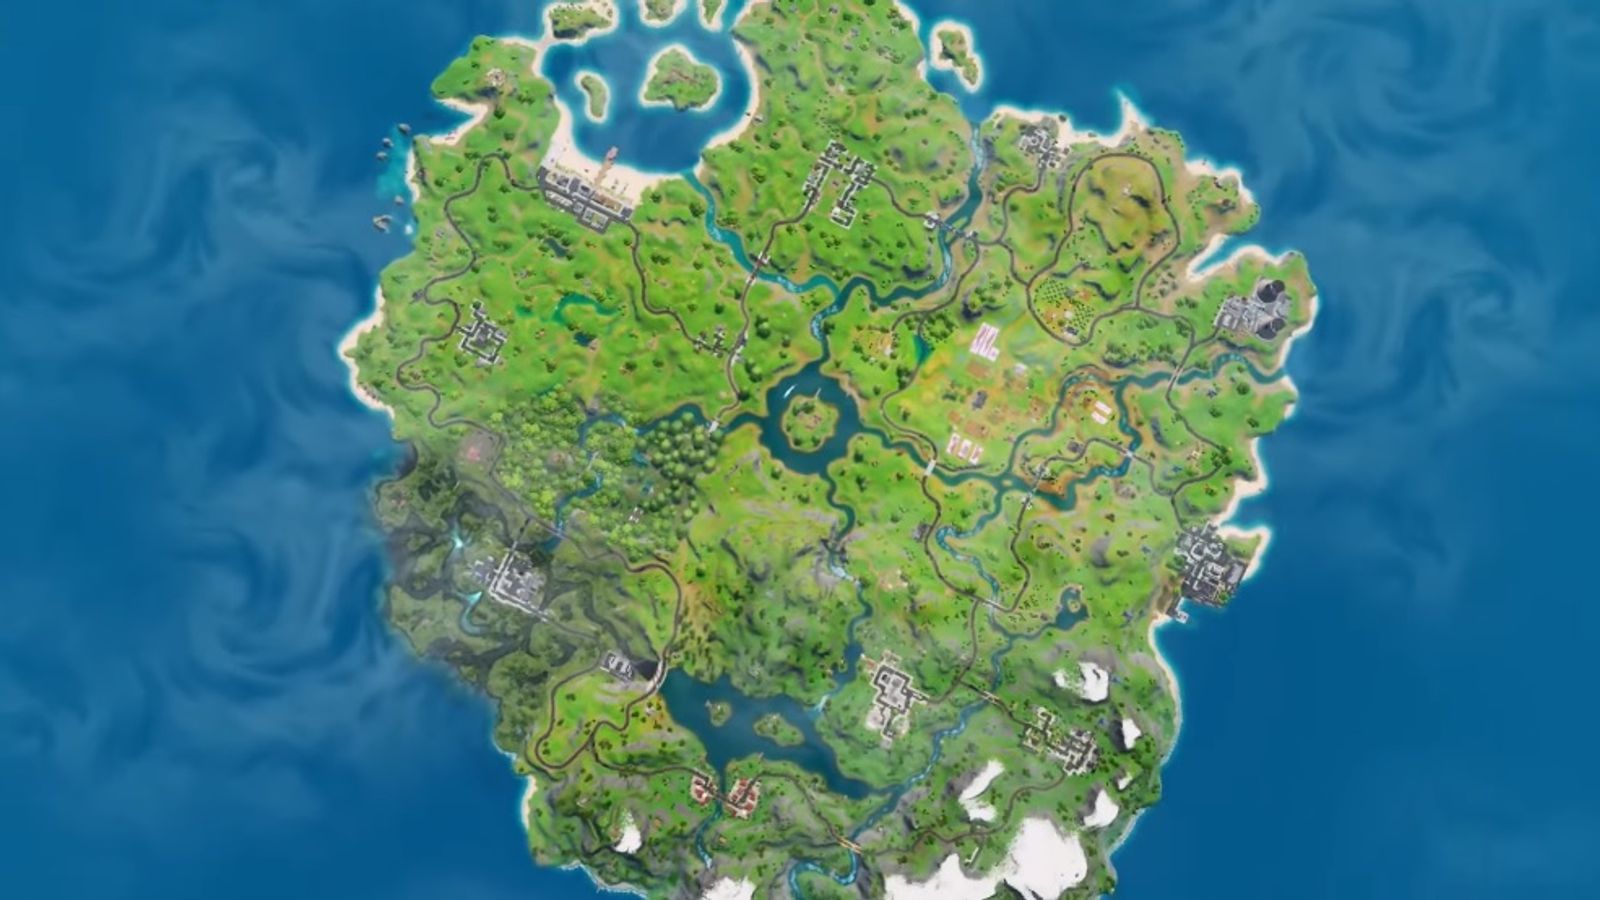 Fortnite now downloading - here's the new map and the Chapter 2 trailer